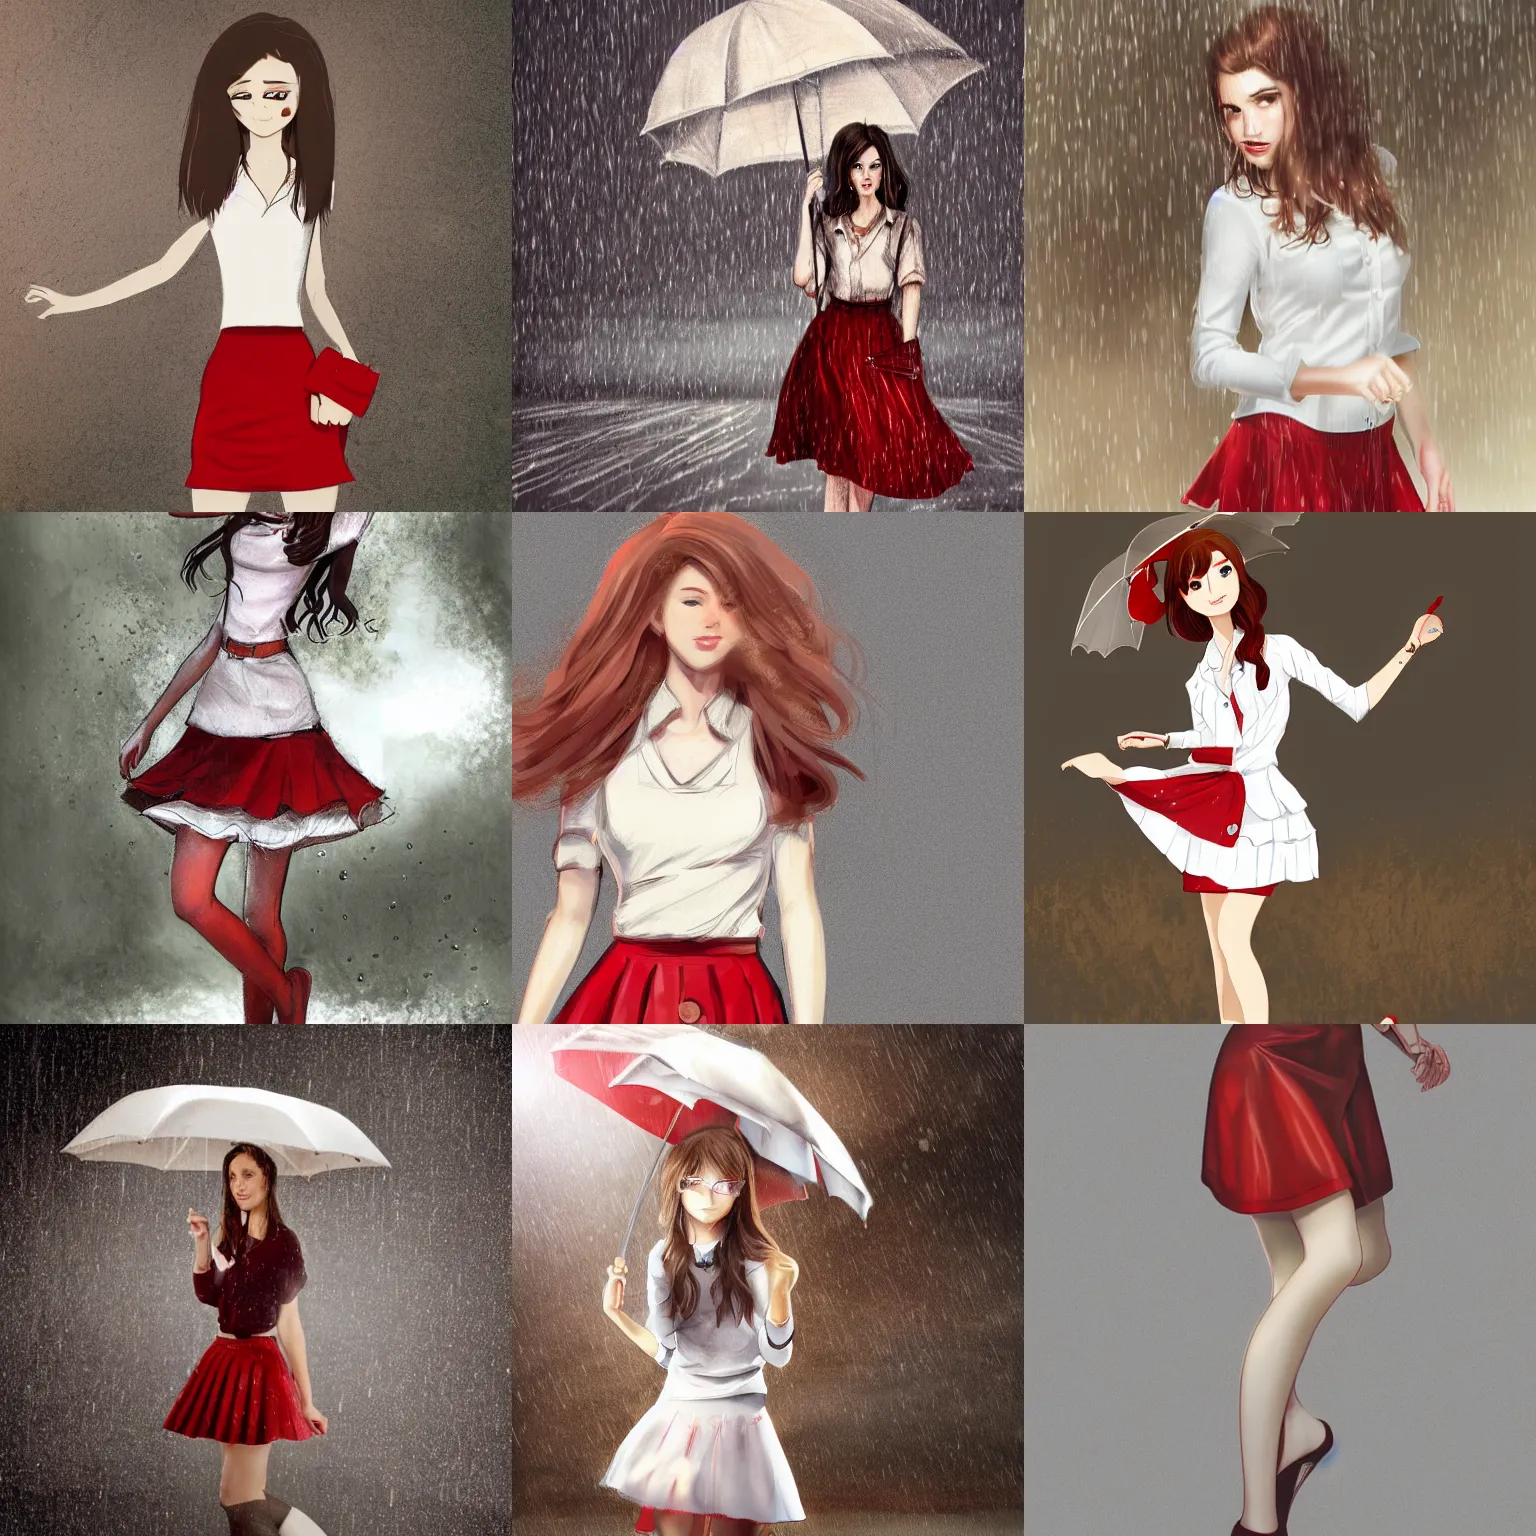 Prompt: beautiful classy young woman with brown hair and pale skin, standing in the rain, wearing a short red skirt and white blouse, concept art, highly detailed, intricate